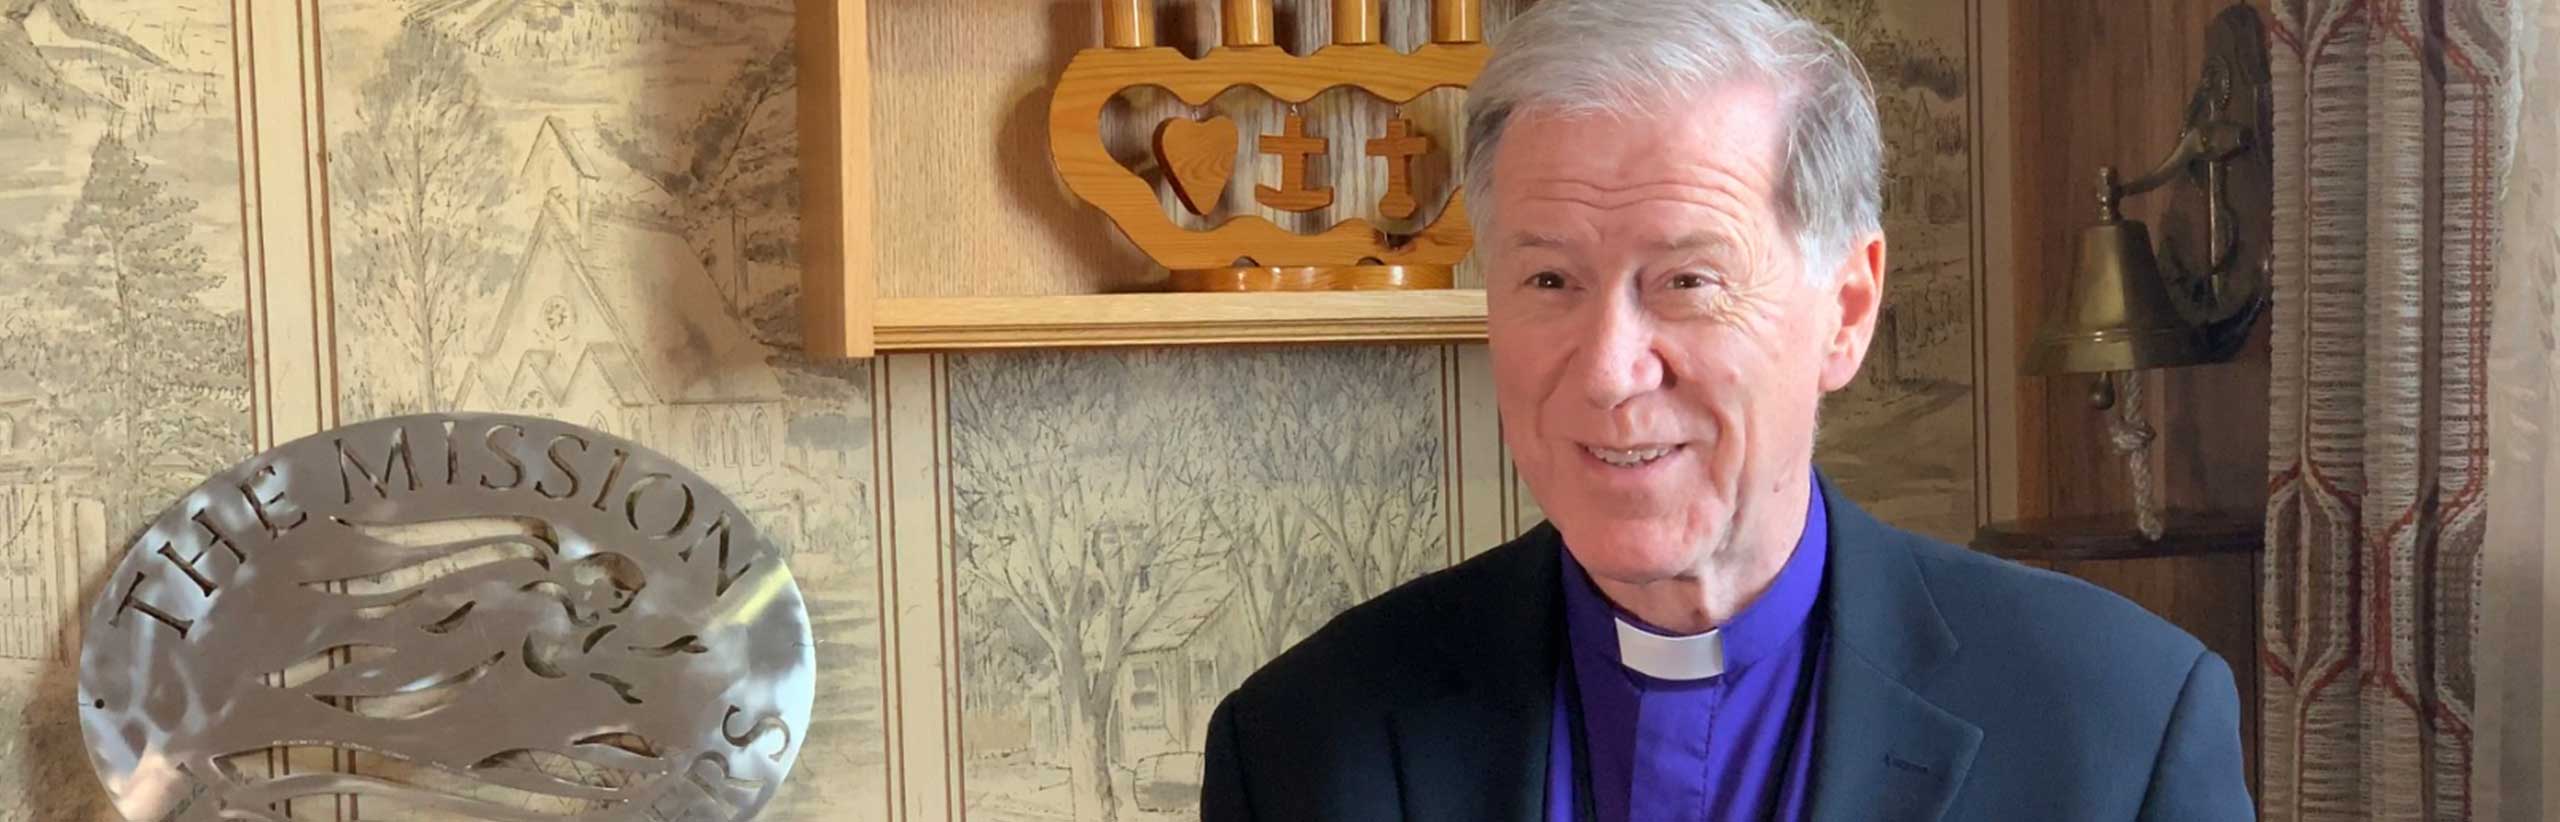 Archbishop-Hiltz-ACTIVE LISTENING-ANGLICAN-ANGLICAN-CHURCH-IN-CANADA-CHAPLAINCY-GOSPEL-MISSION-TO-SEAFARERS